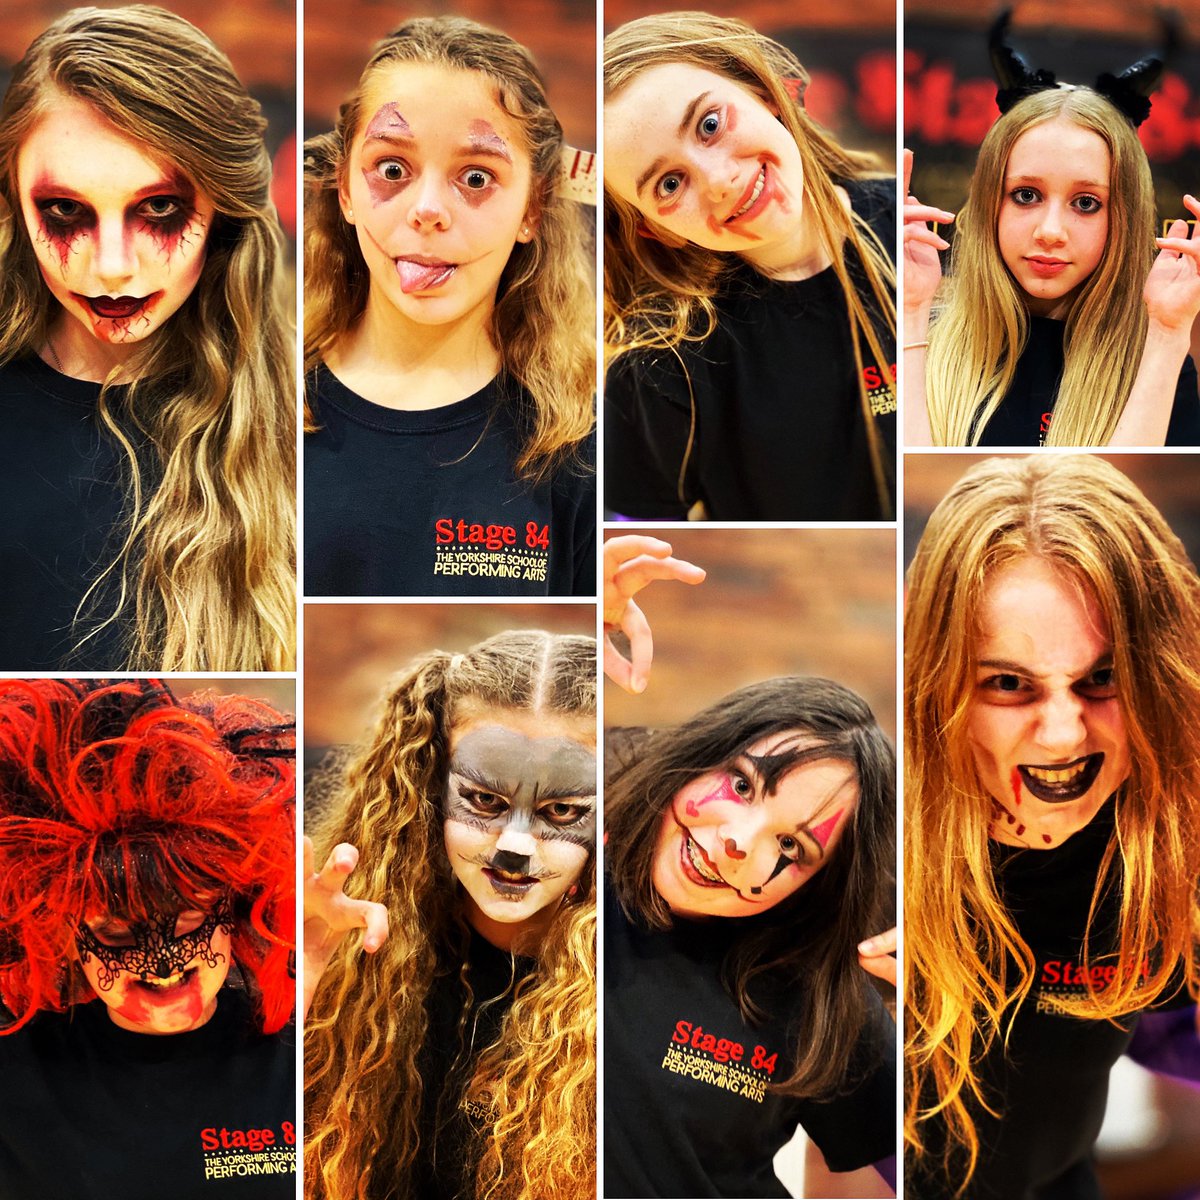 🎃👻 We hope you’ve had an enjoyable half term break and today we say Happy Halloween! Here are a few of our super-talented Performing Arts students showing off their hair & makeup up skills during classes last week - awesome job guys!
#stage84 #halloween #performingarts